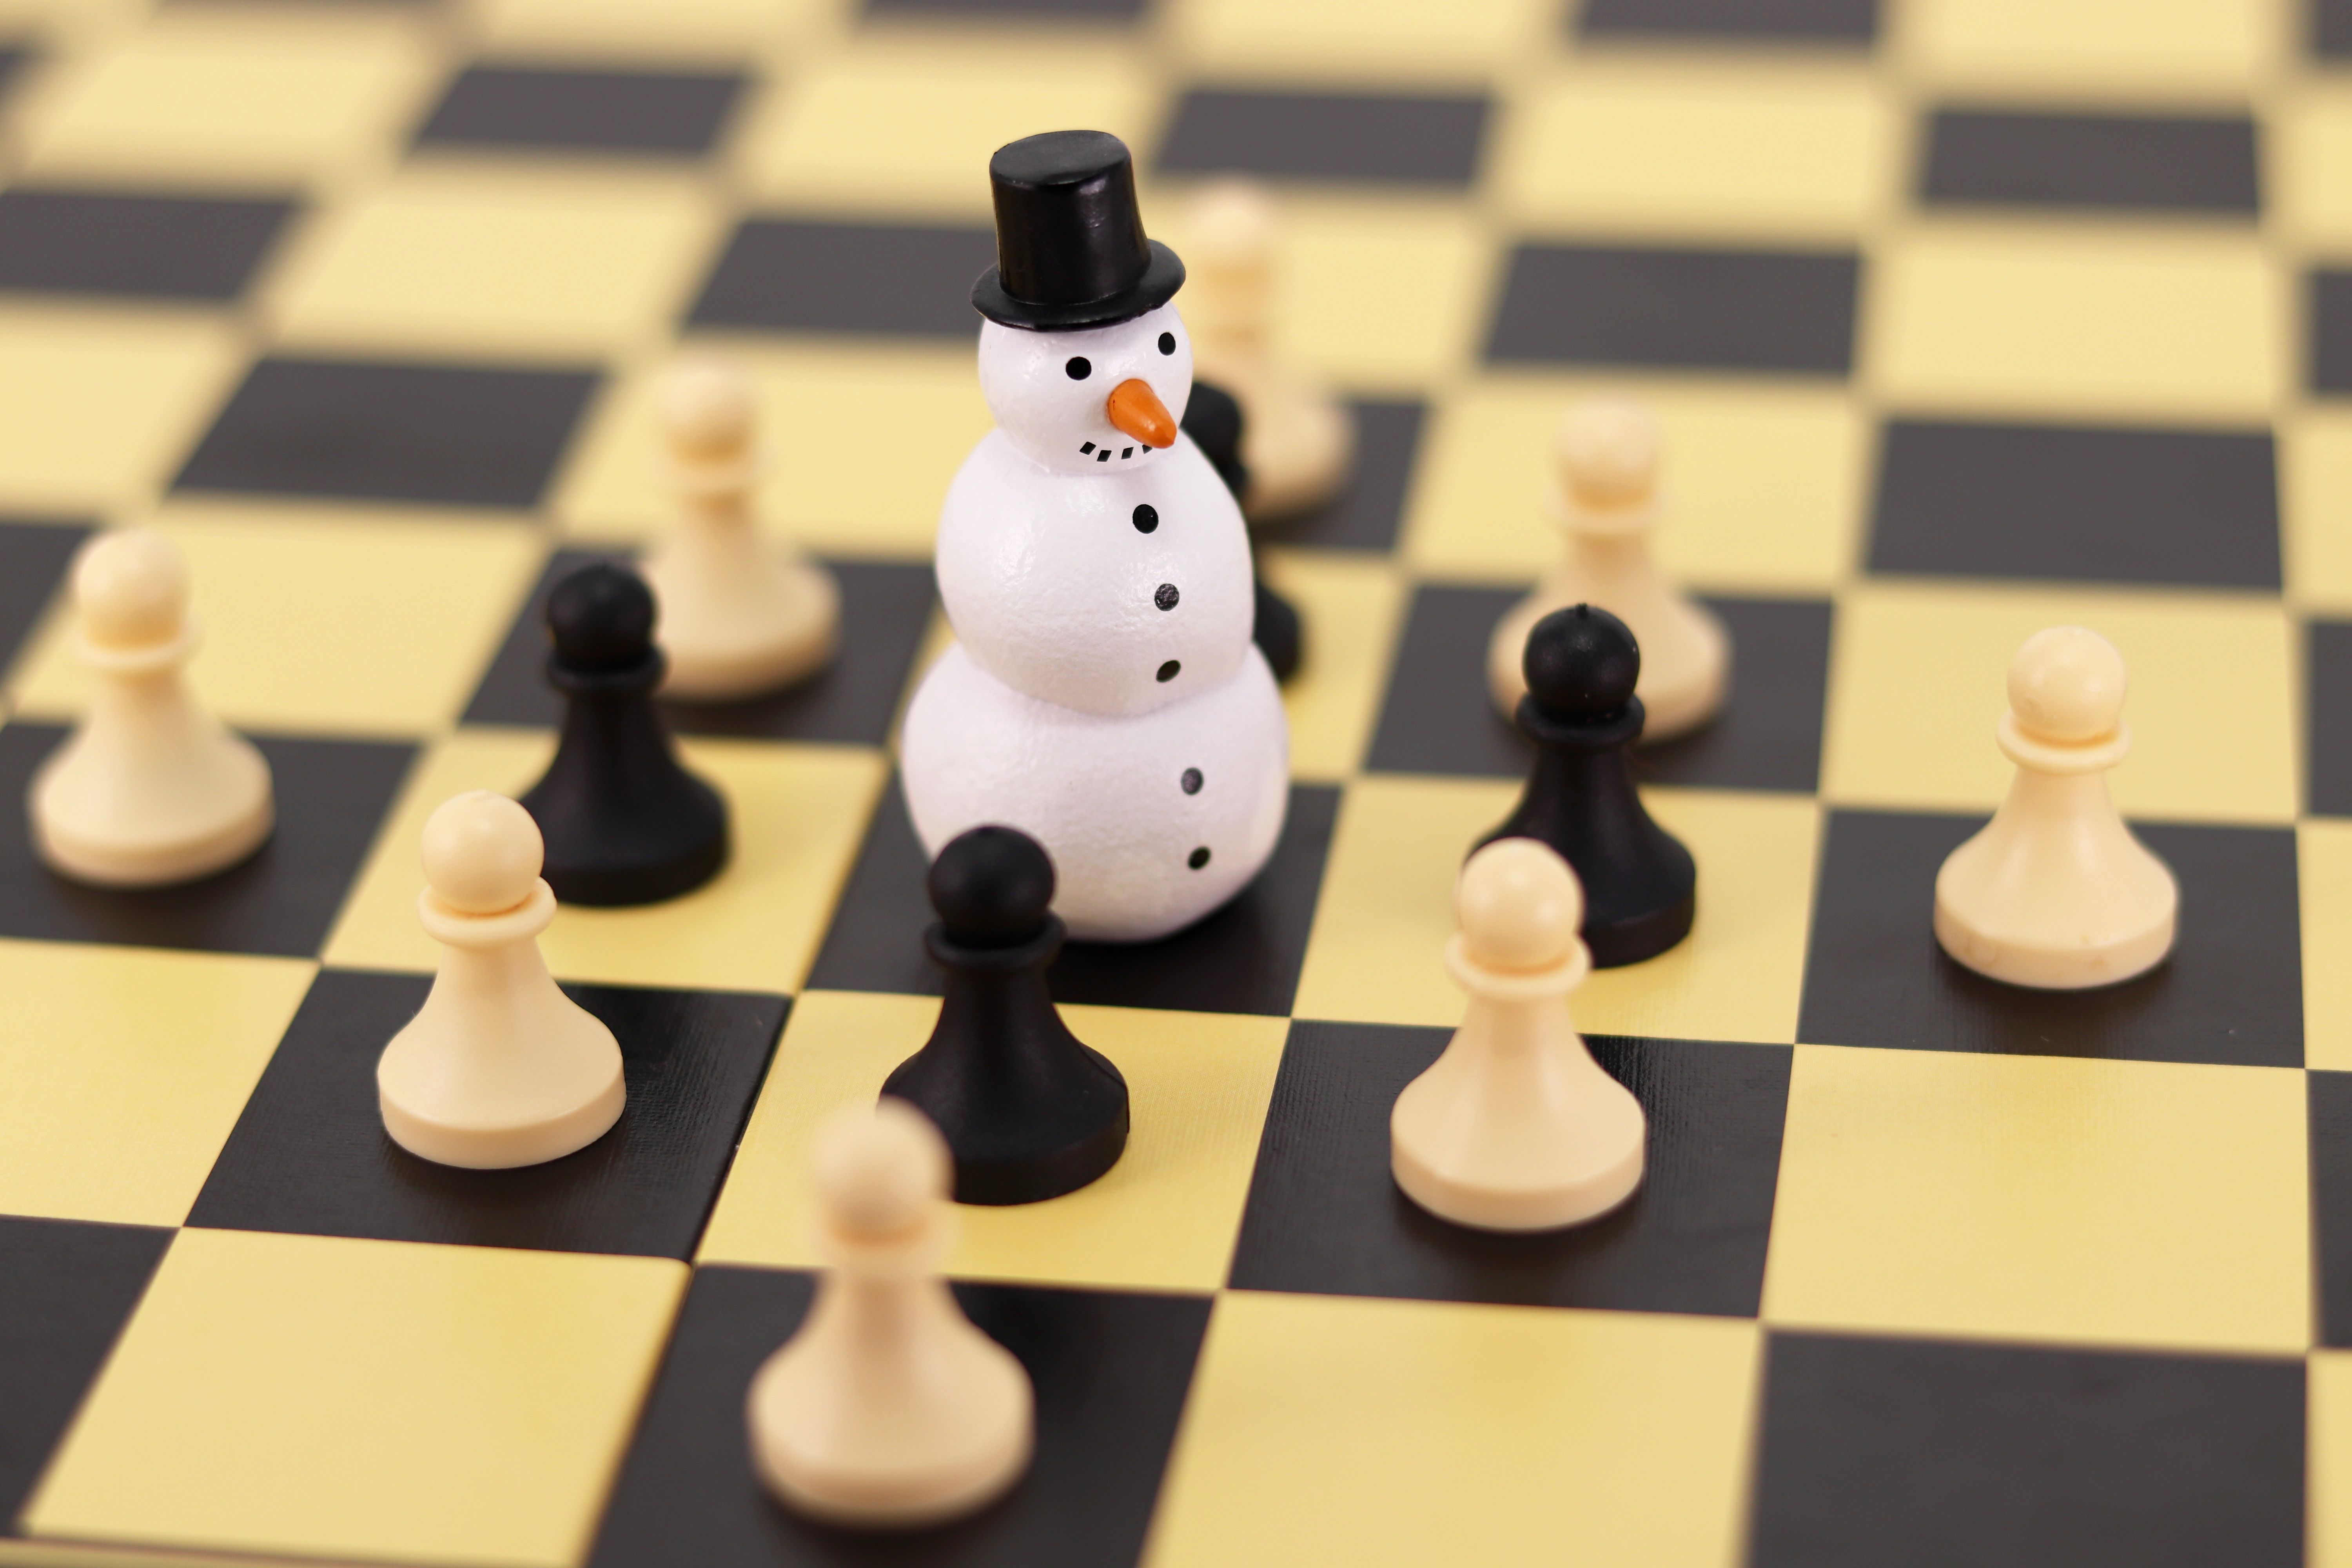 Download wallpaper 6000x4000 chess, snowman, figures, pawns, chess board, game HD background